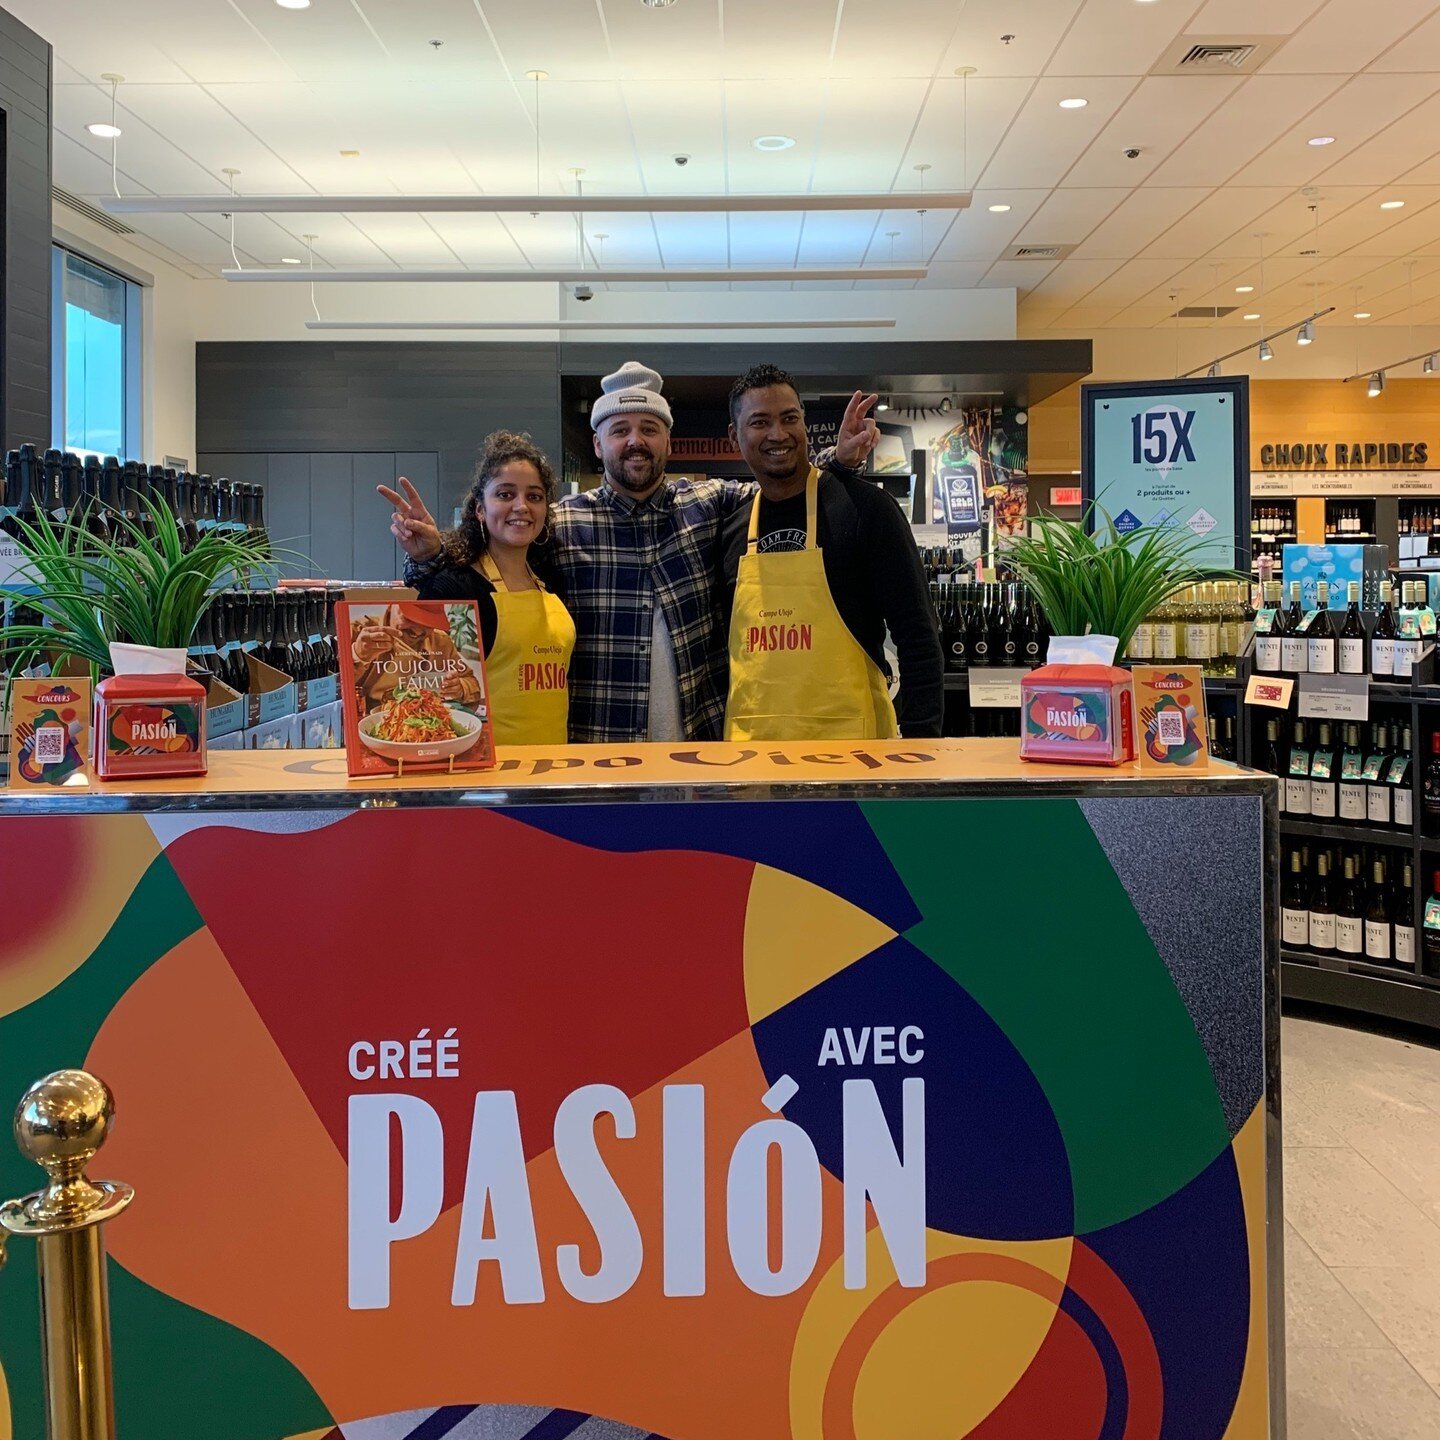 Speed was present yesterday at the Campo Viejo event with Laurent Dagenais at the SAQ Brossard - Taschereau/Adam.

The first 50 consumers received a free signed book by Laurent Dagenais, enjoyed a Campo Viejo tasting, entered a contest with Narcity t